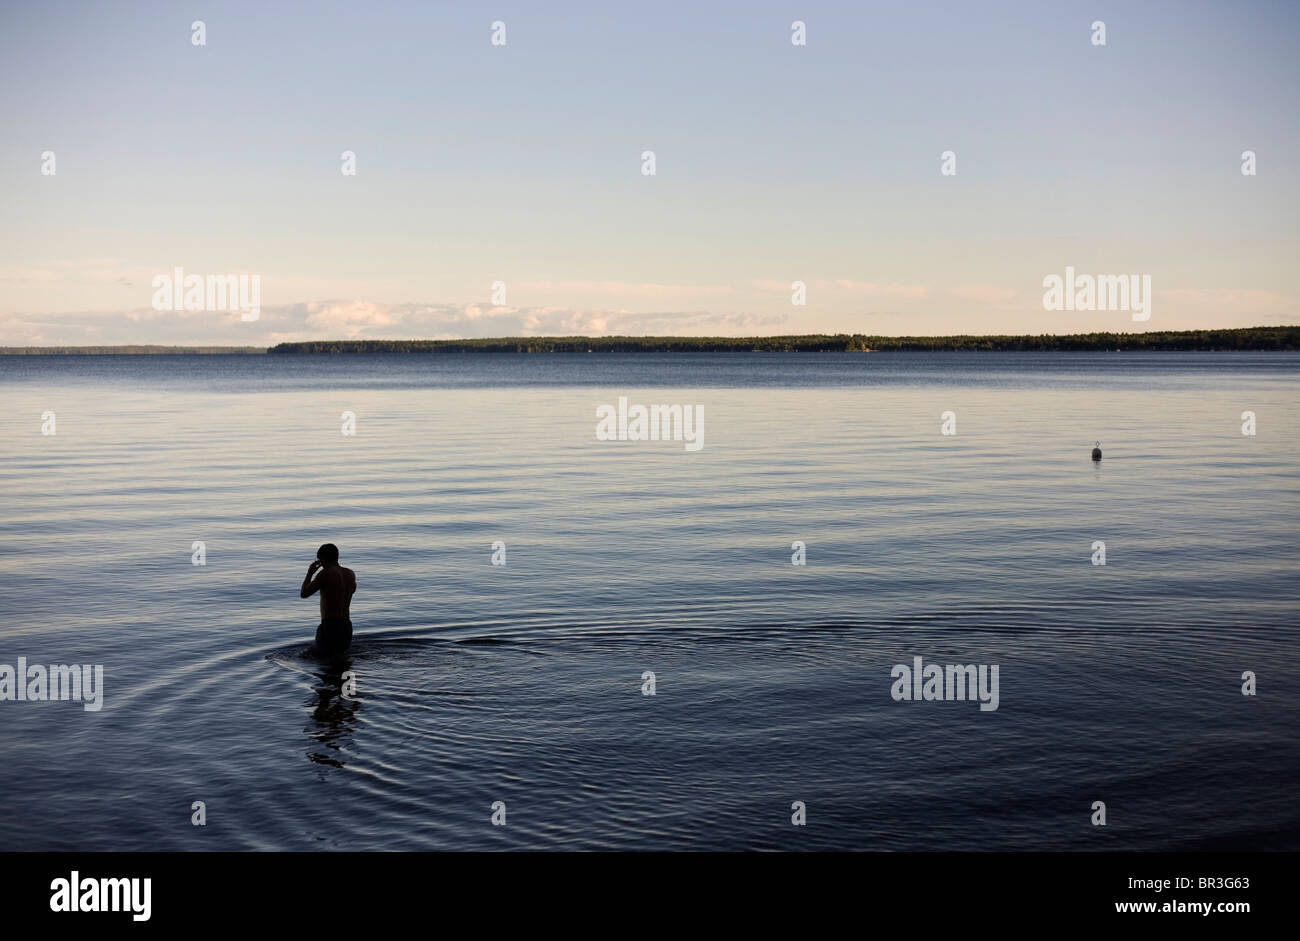 A man, silhouetted agains the calm water, wades into dark, blue water at dusk. Stock Photo